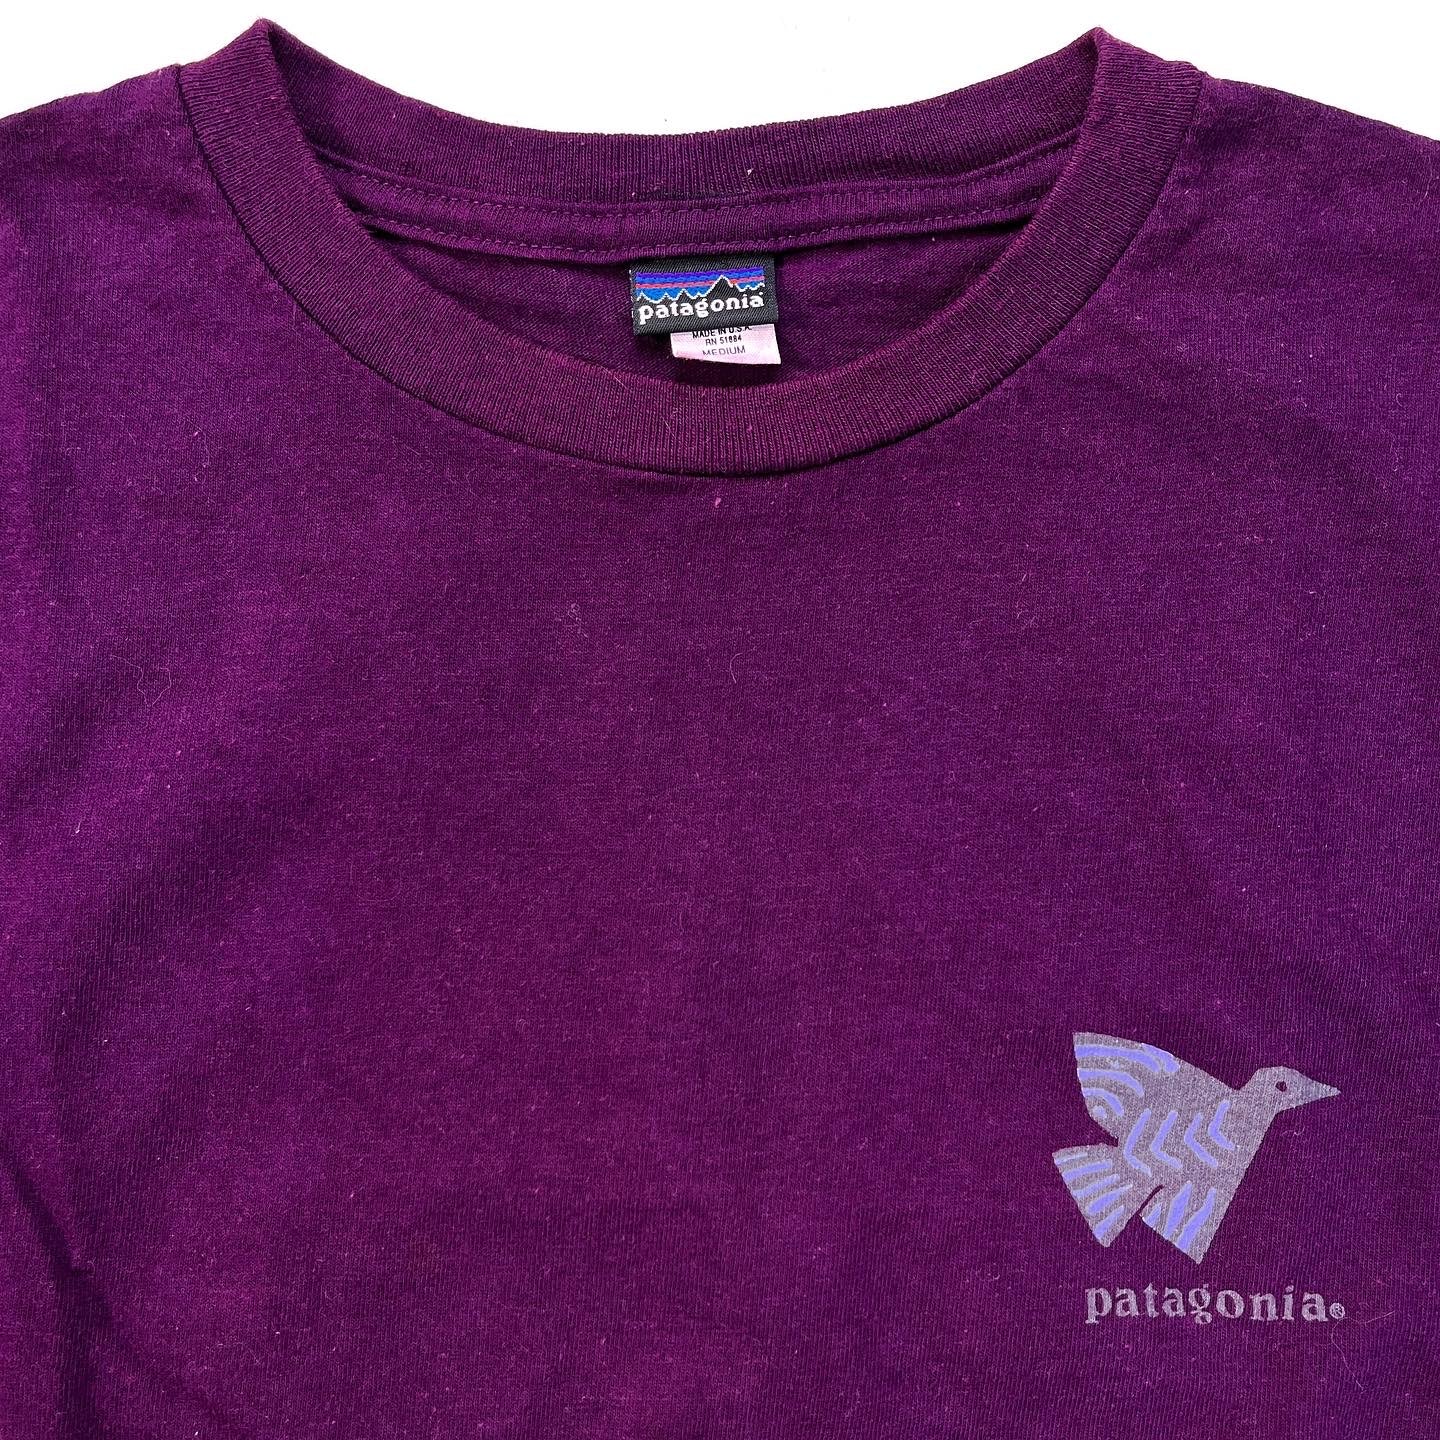 1992 Patagonia Made In The U.S.A. Printed T-Shirt, Dark Purple (S)